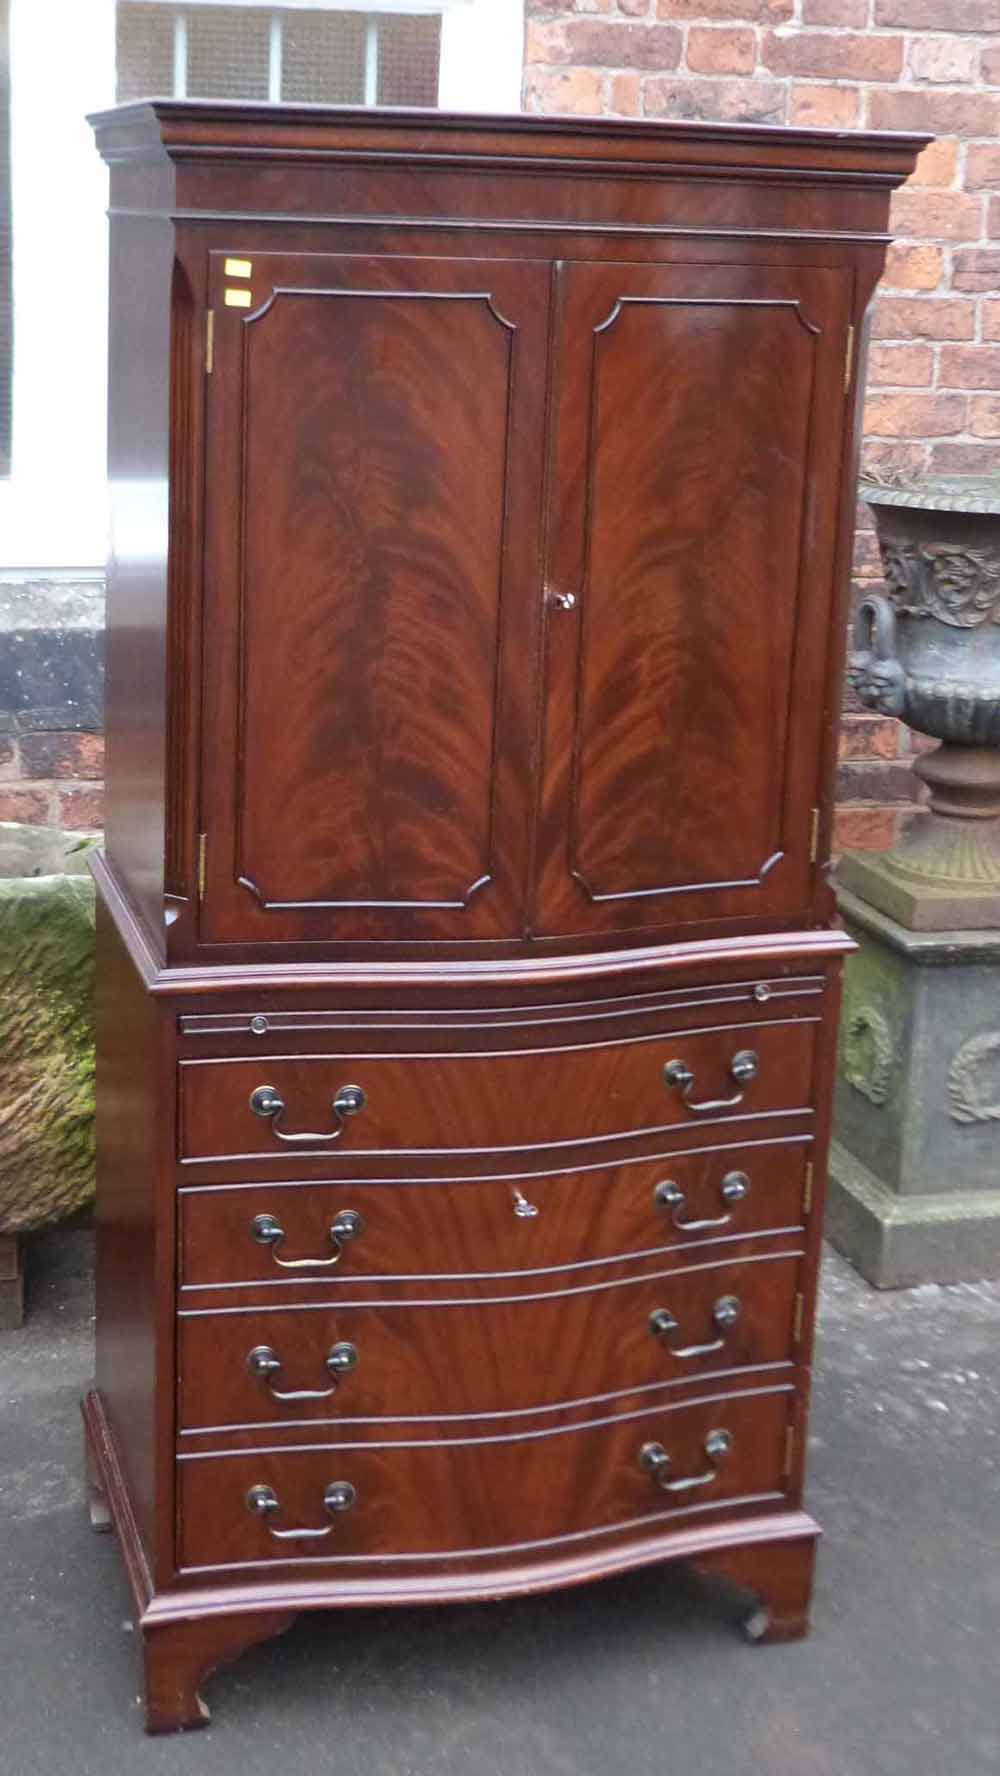 Reproduction mahogany bow front drinks cabinet. Condition report: see terms and conditions